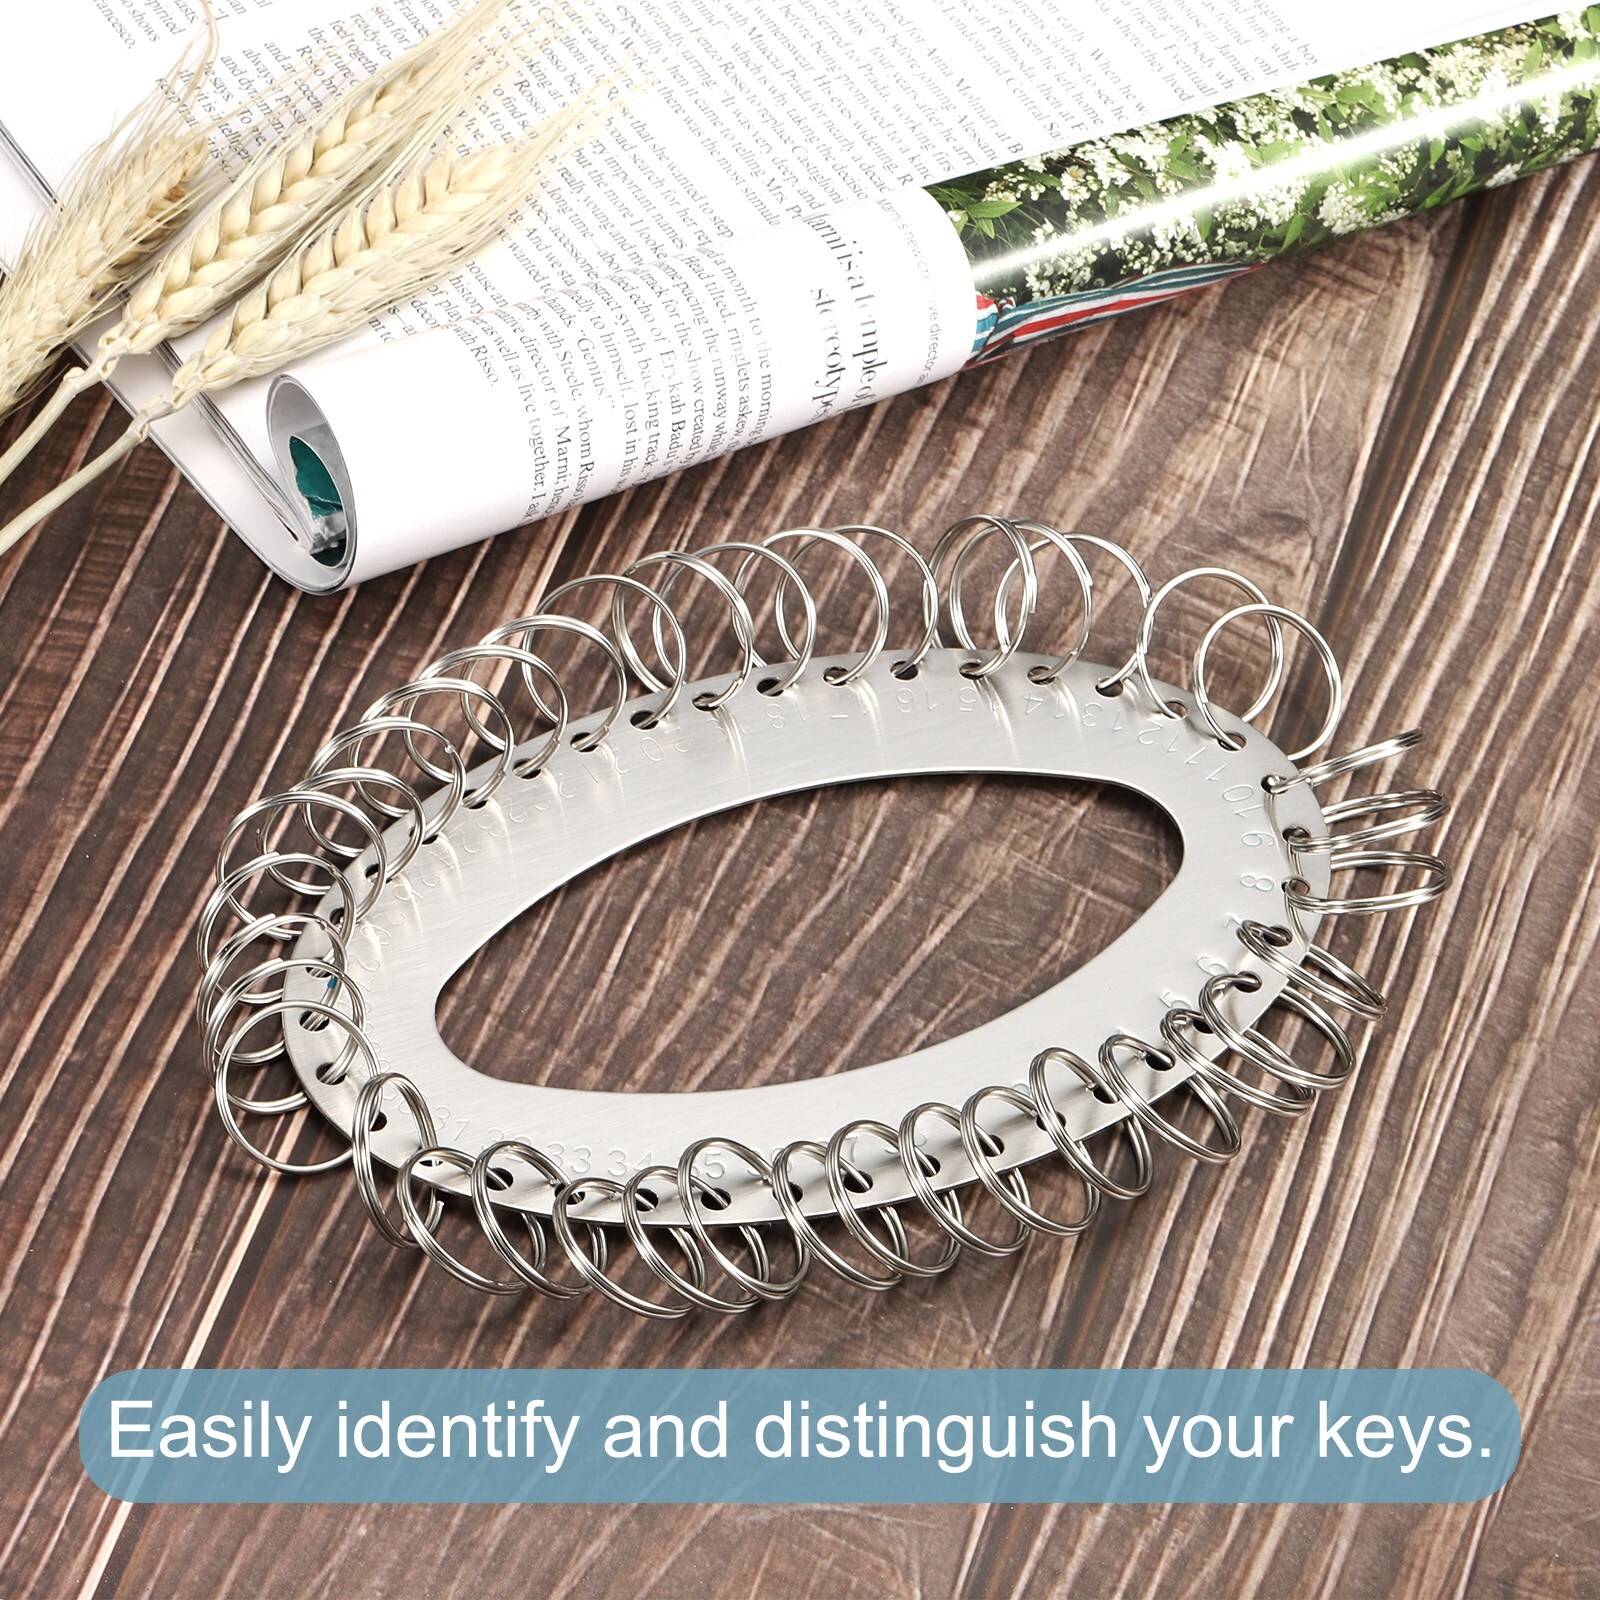 Arabic Numbers Indicated 38 Rings Key Organizer Holder 